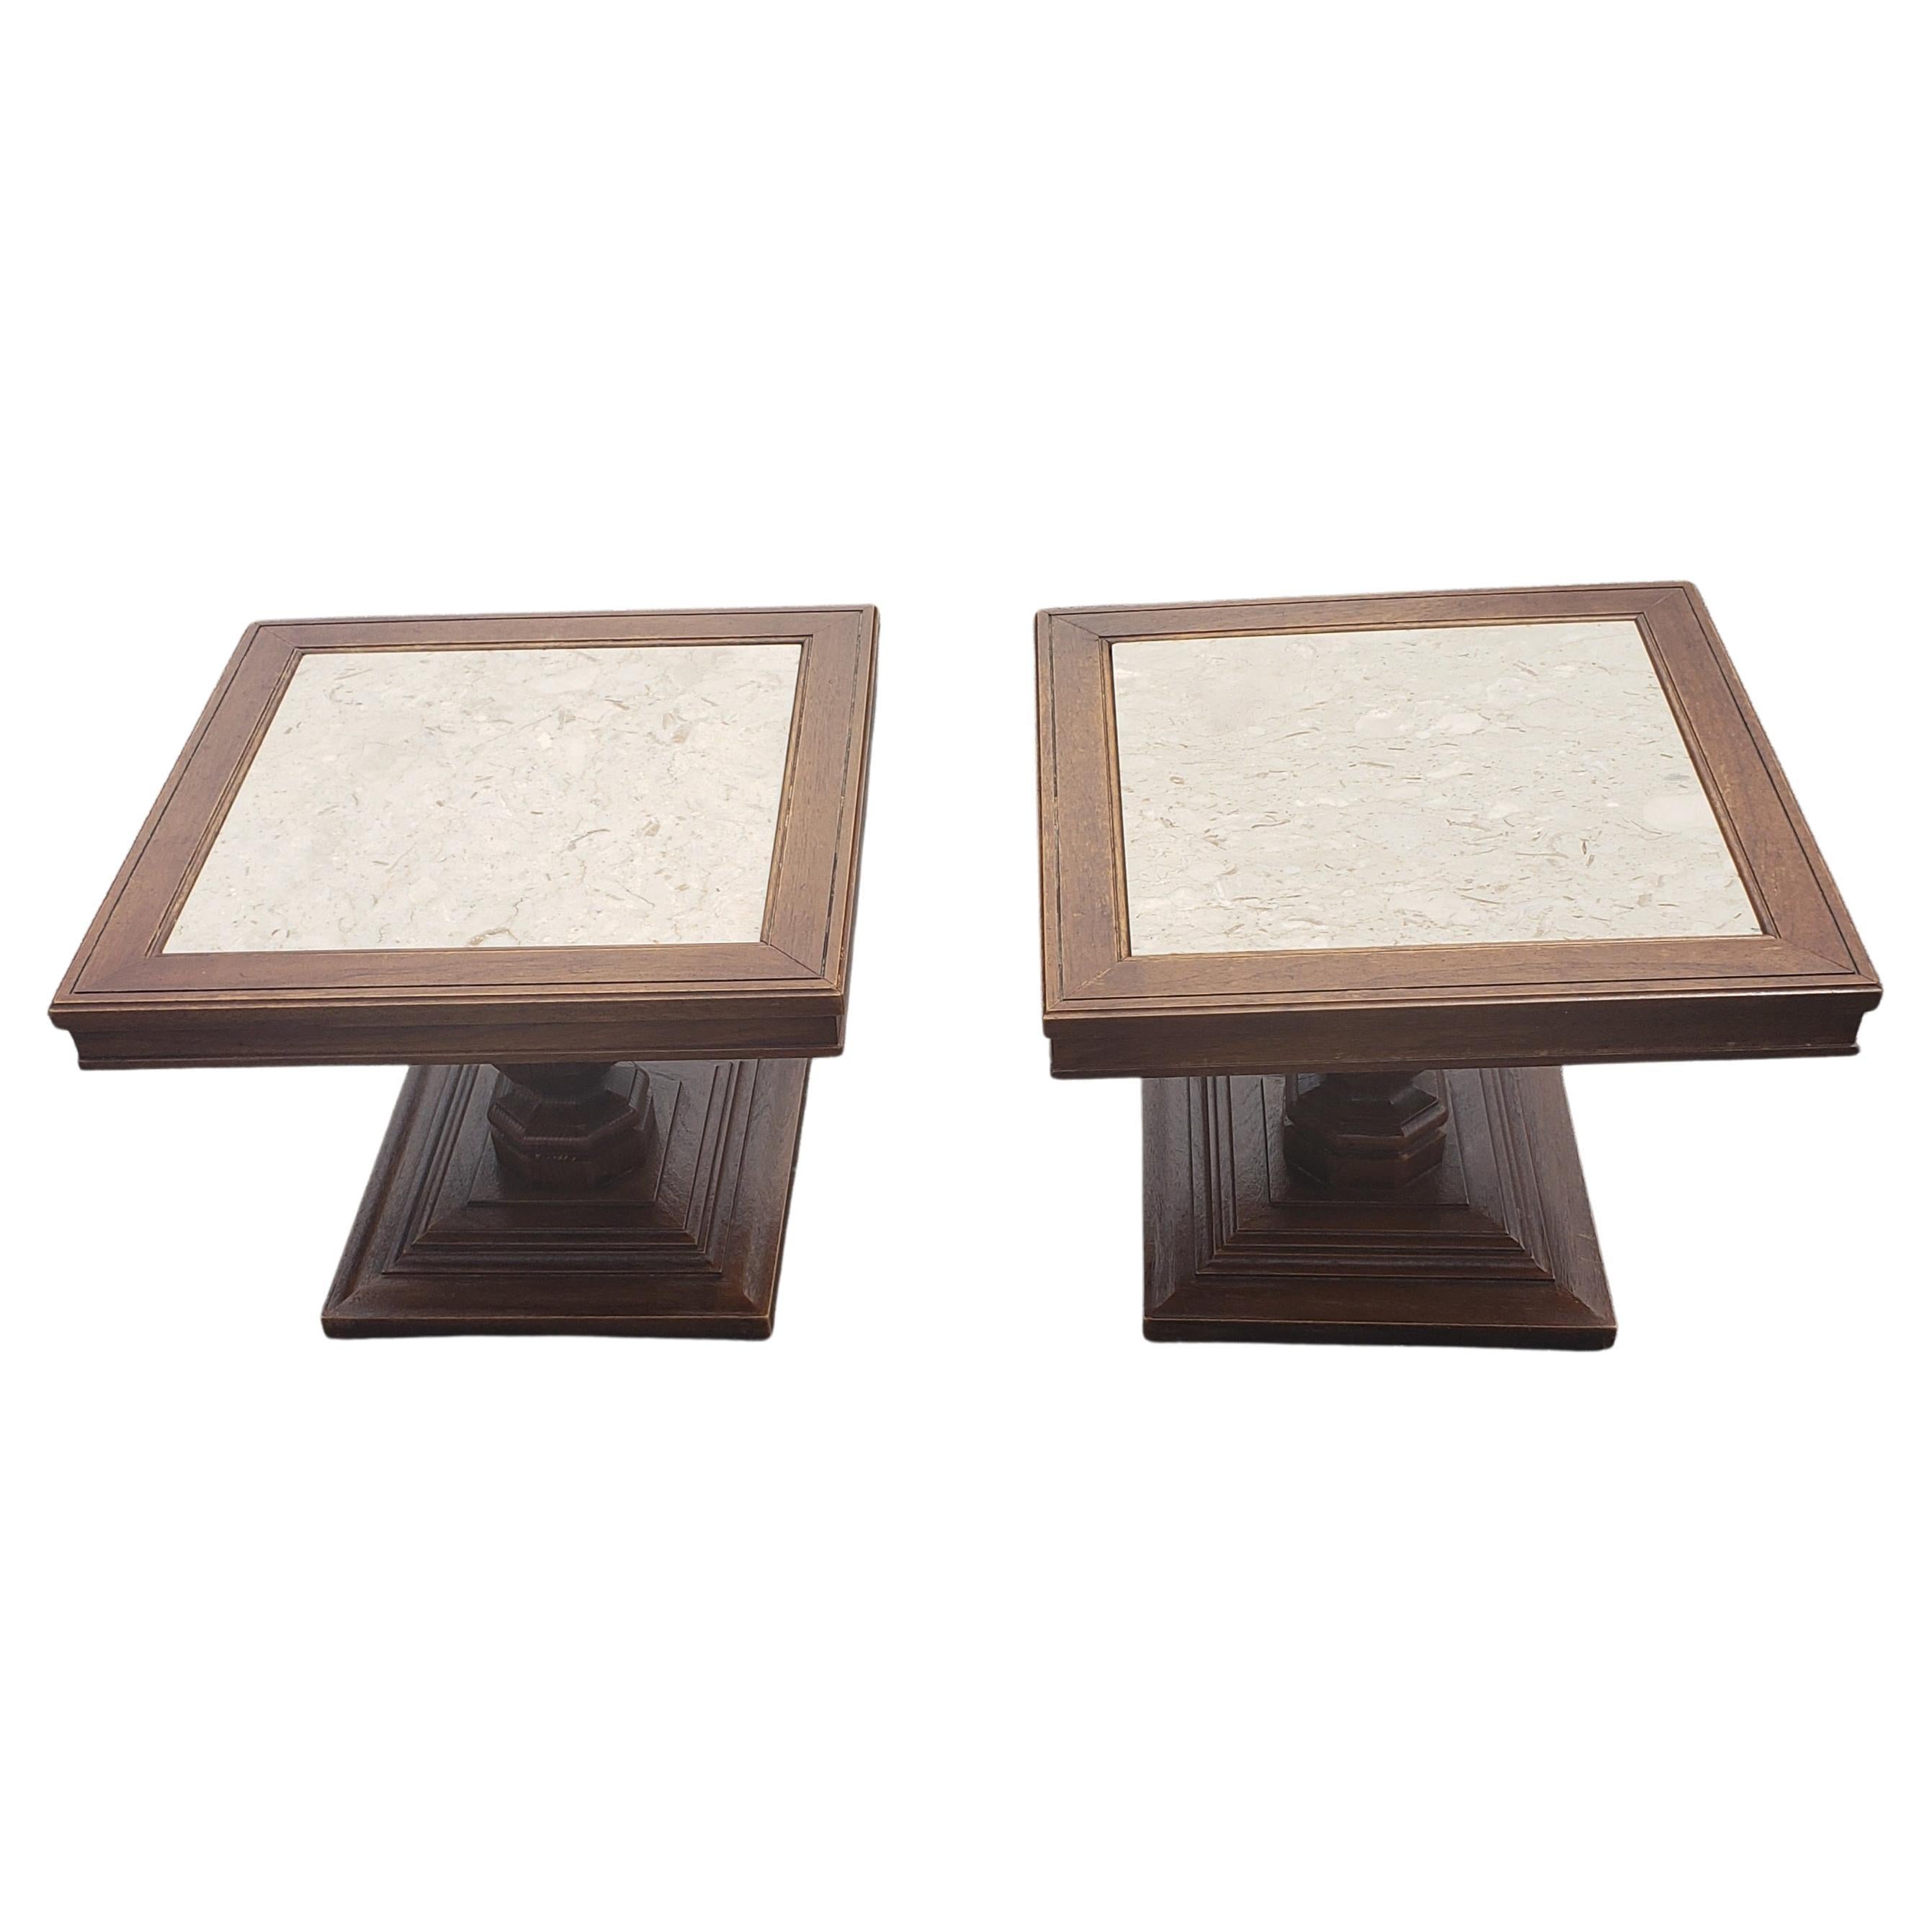 A pair of 1960s Italian pedestal oak side tables with marble top inserts. No chips on marble inserts. Very good vintage condition. Tables measure 20